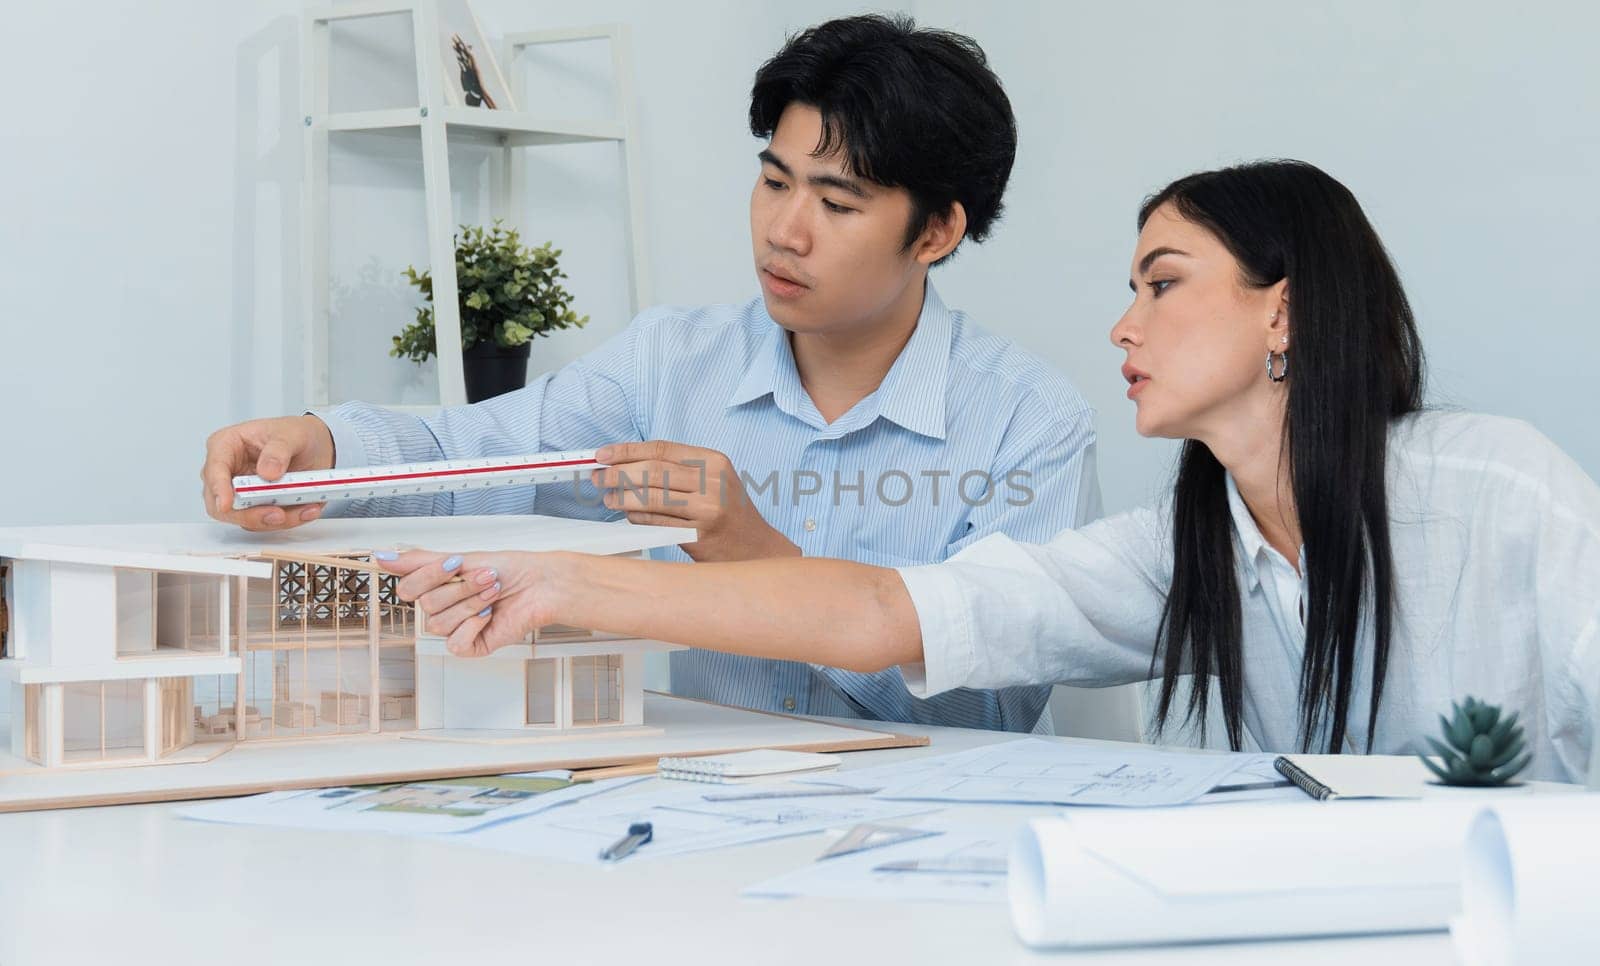 Portrait of cooperative engineer team working together to measure house model by using ruler and architectural equipment. Creative business design and teamwork concept. Immaculate..